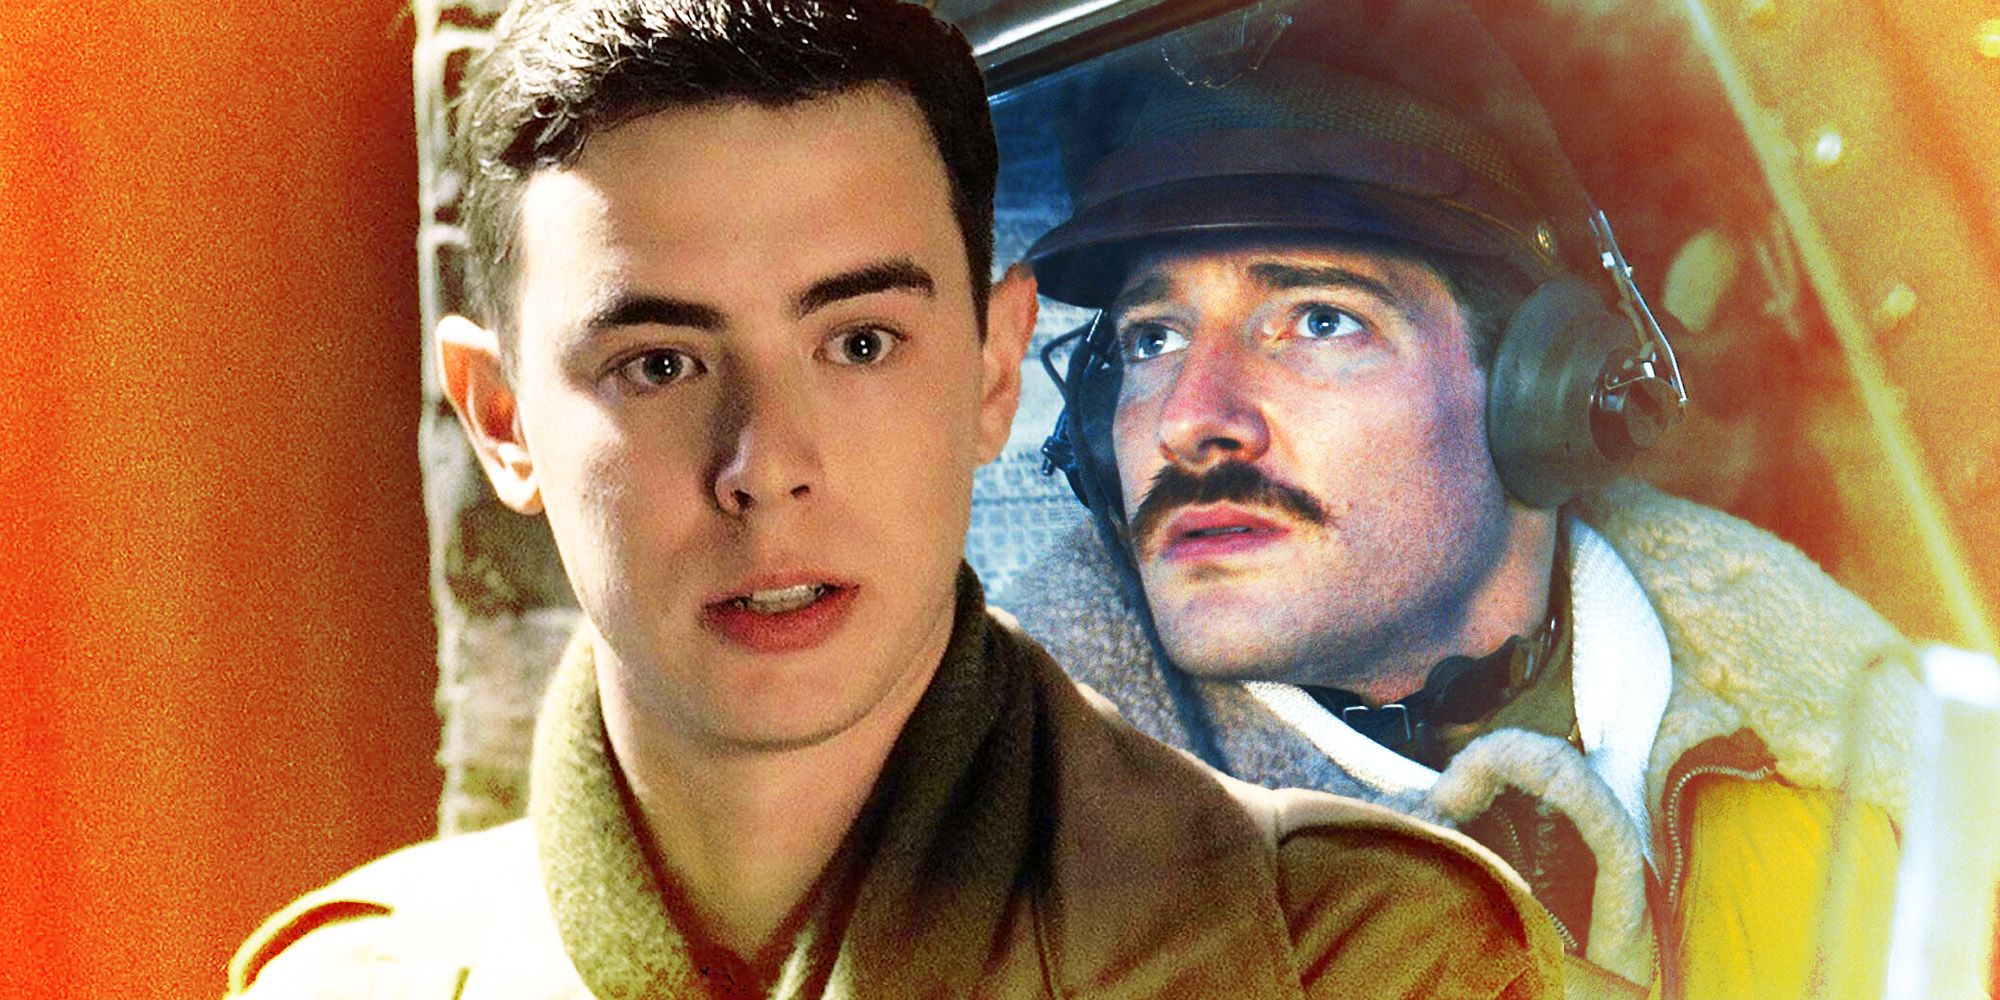 Colin Hanks in Band of Brothers and Sawyer Spielberg in Masters of the Air